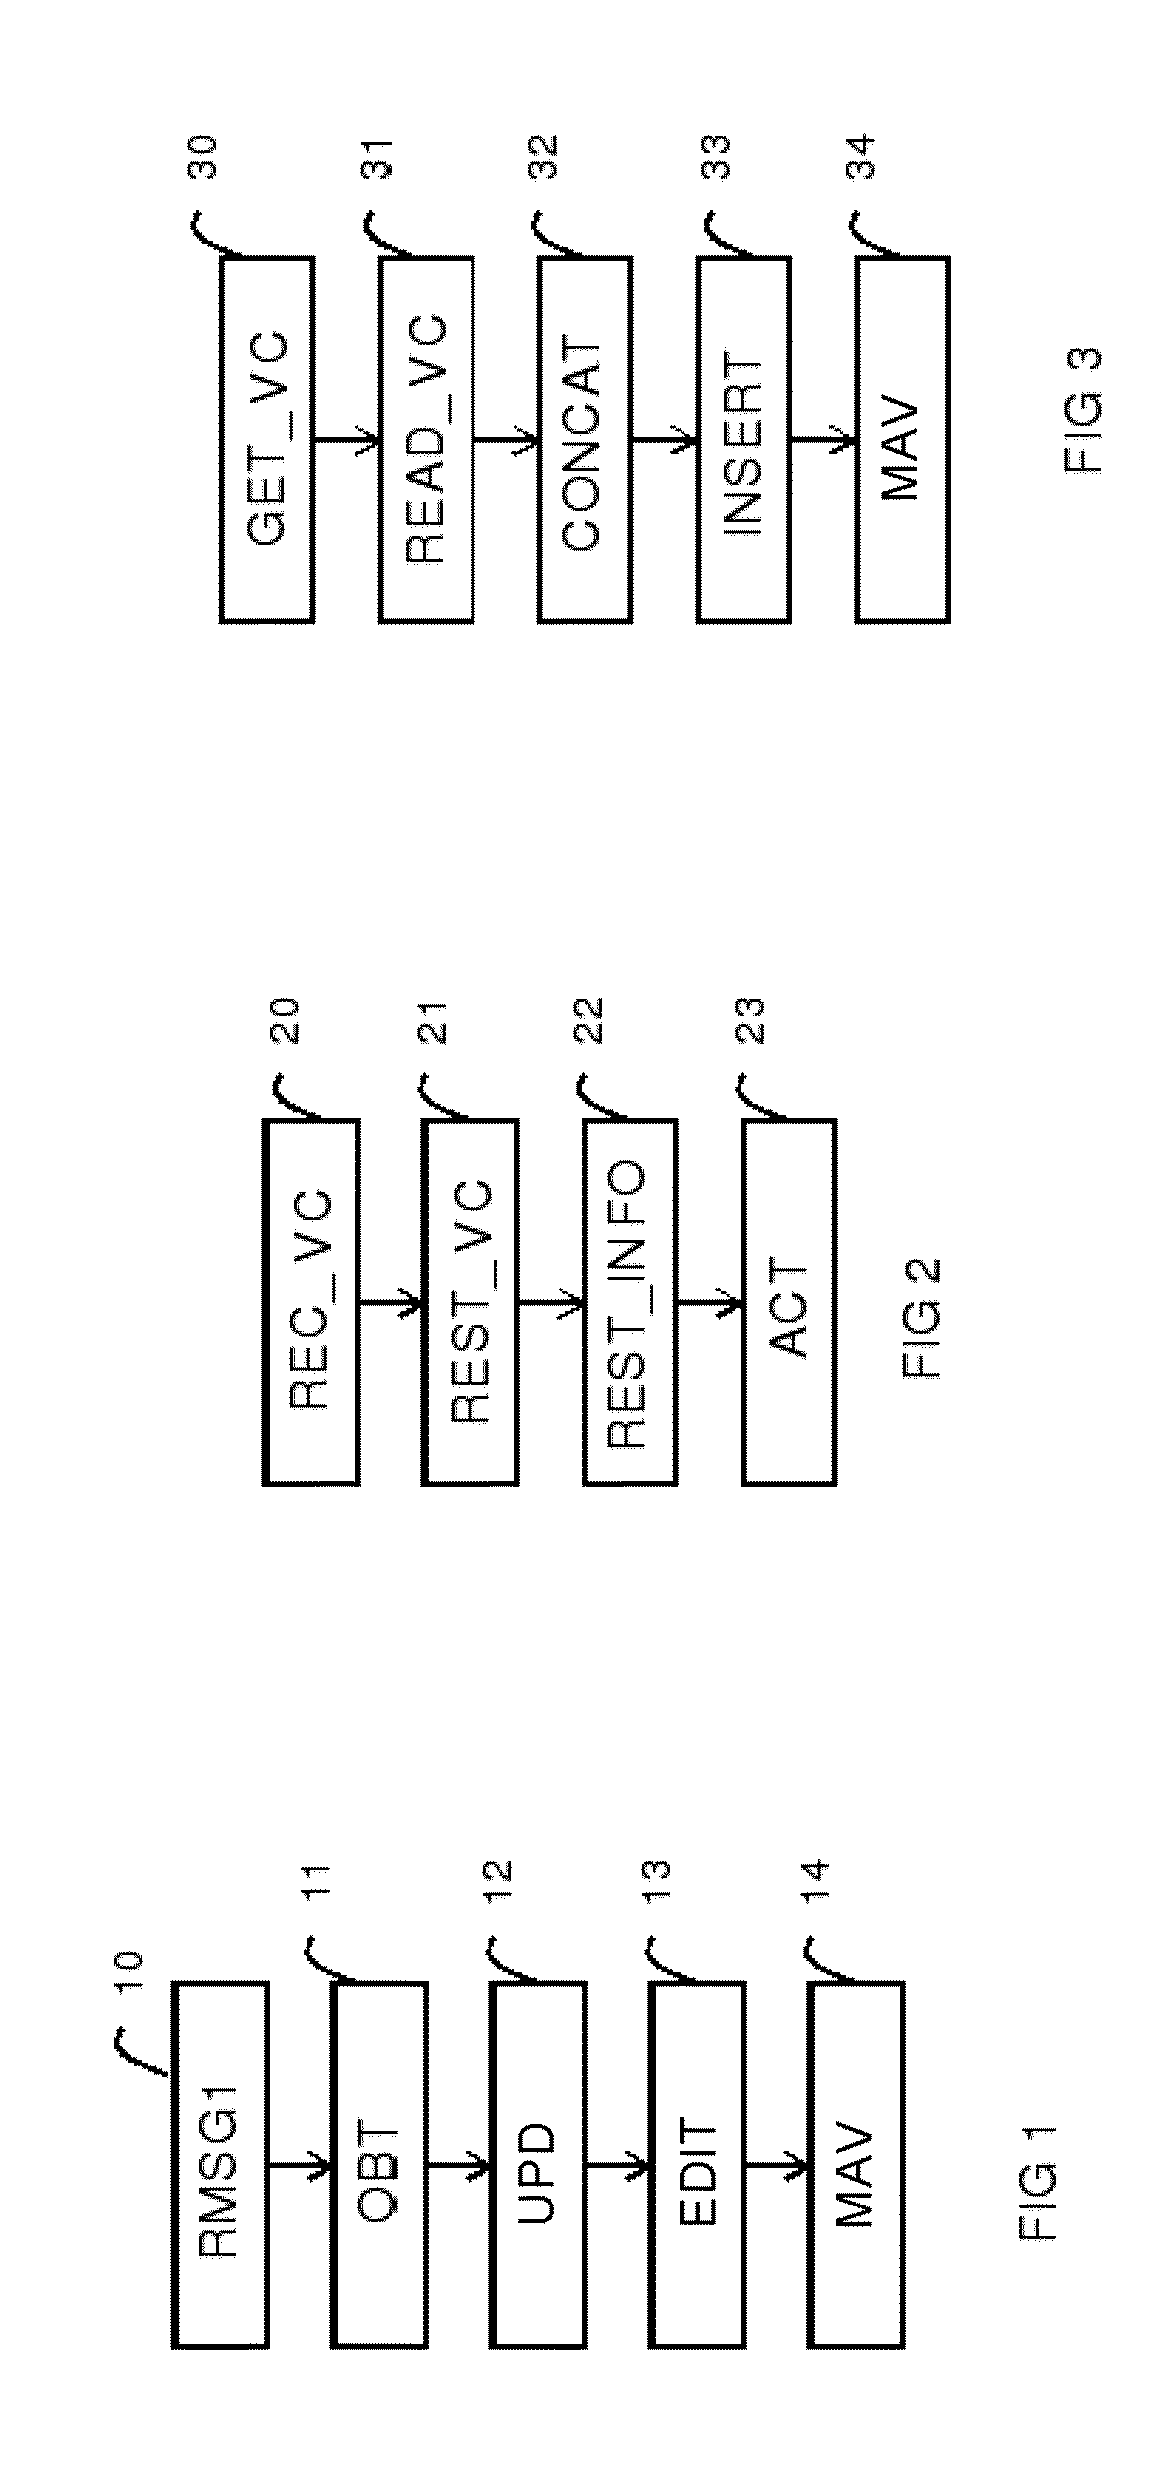 Method and device for modifying a compounded voice message